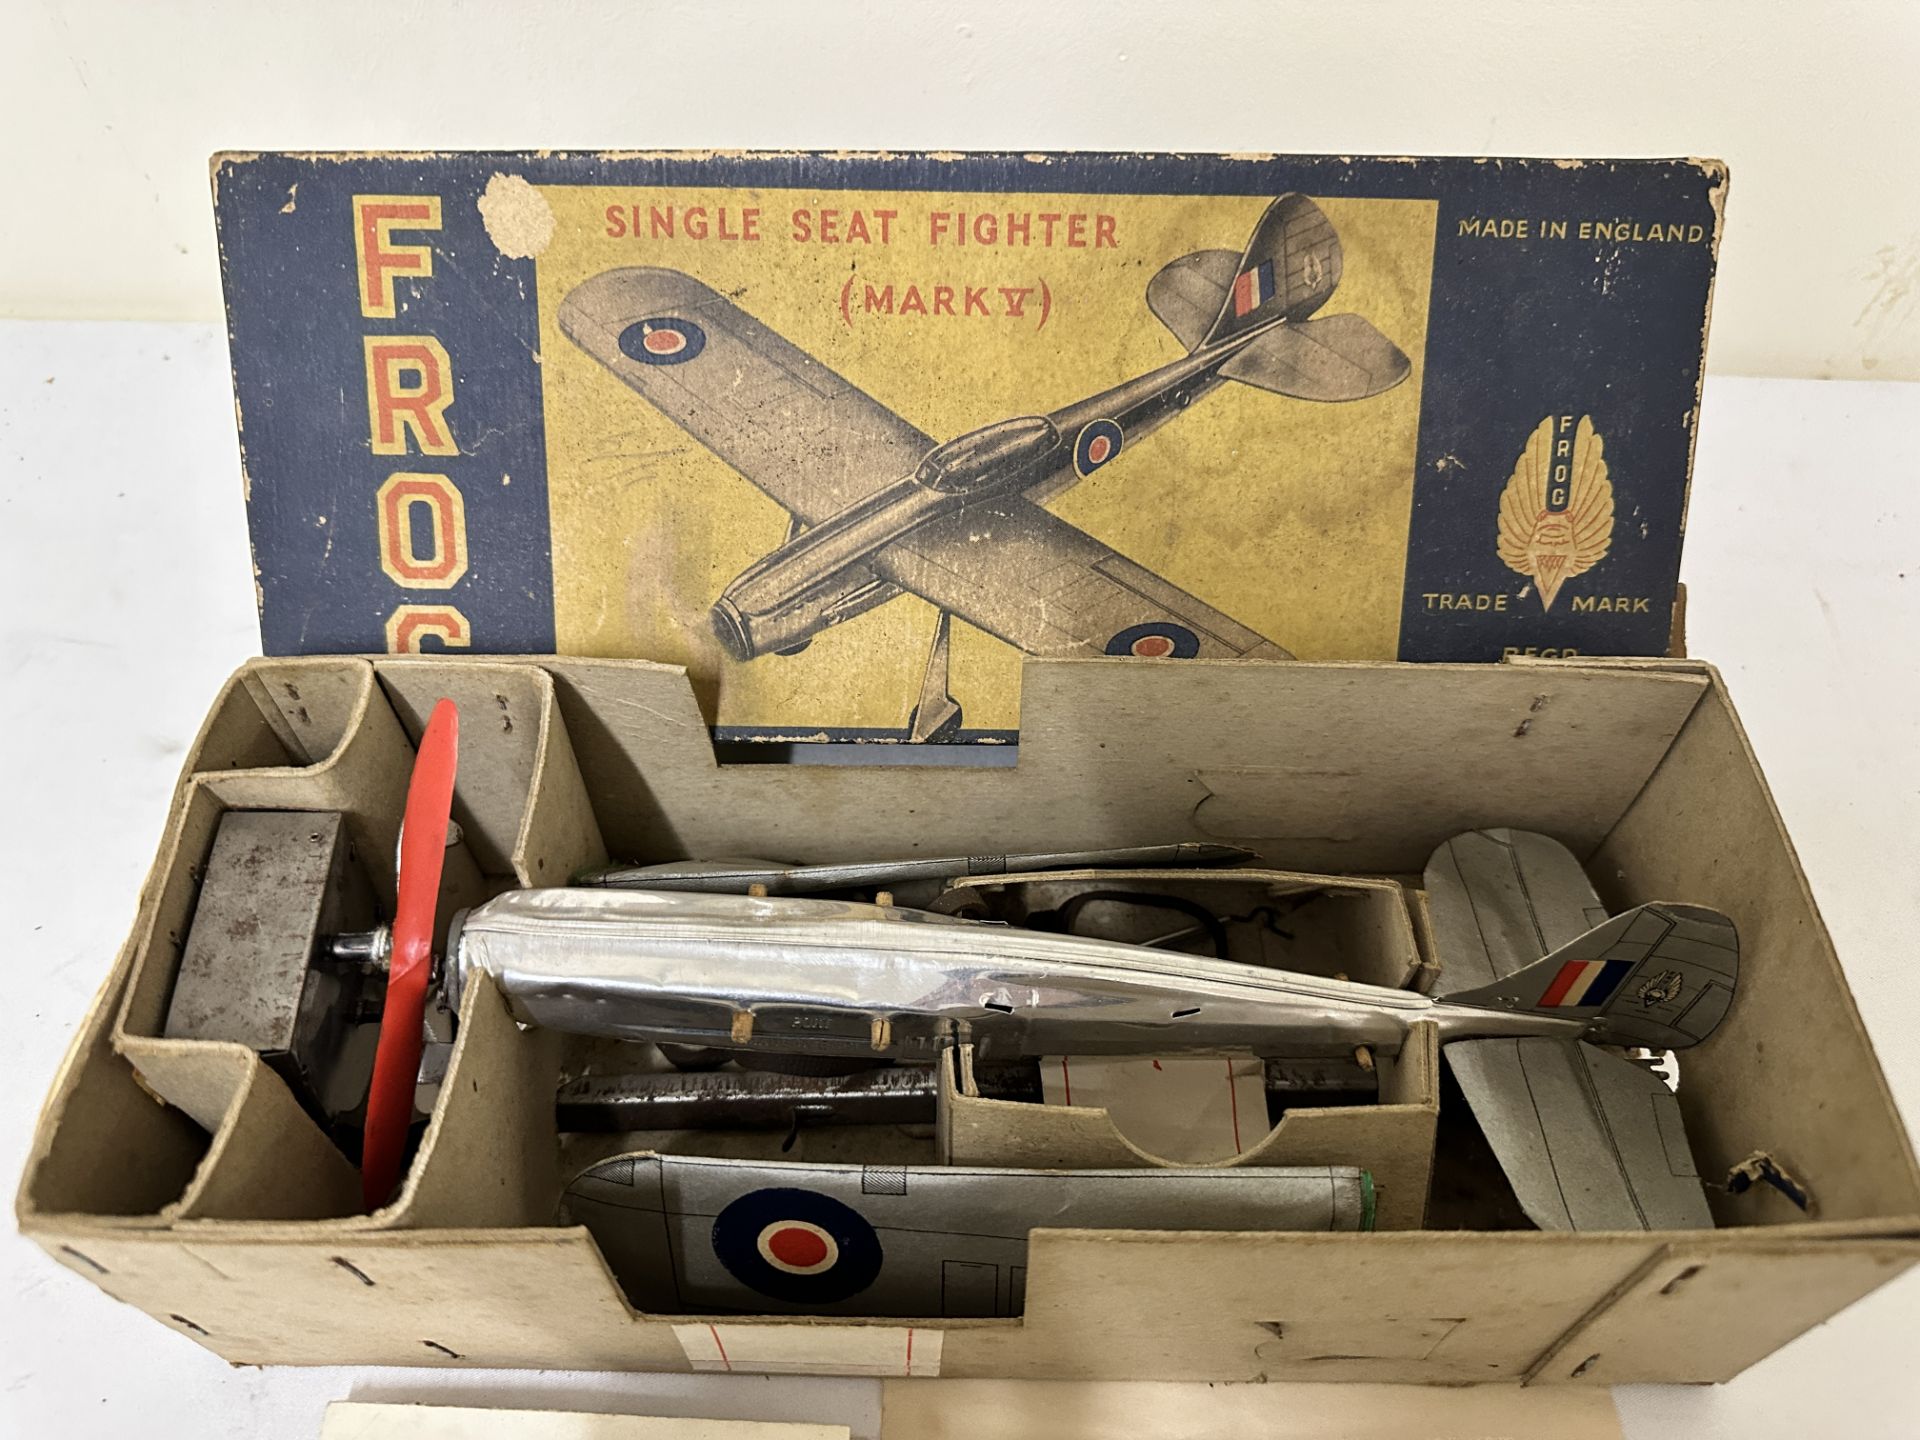 Frog single seater fighter plane in original box - Image 2 of 4